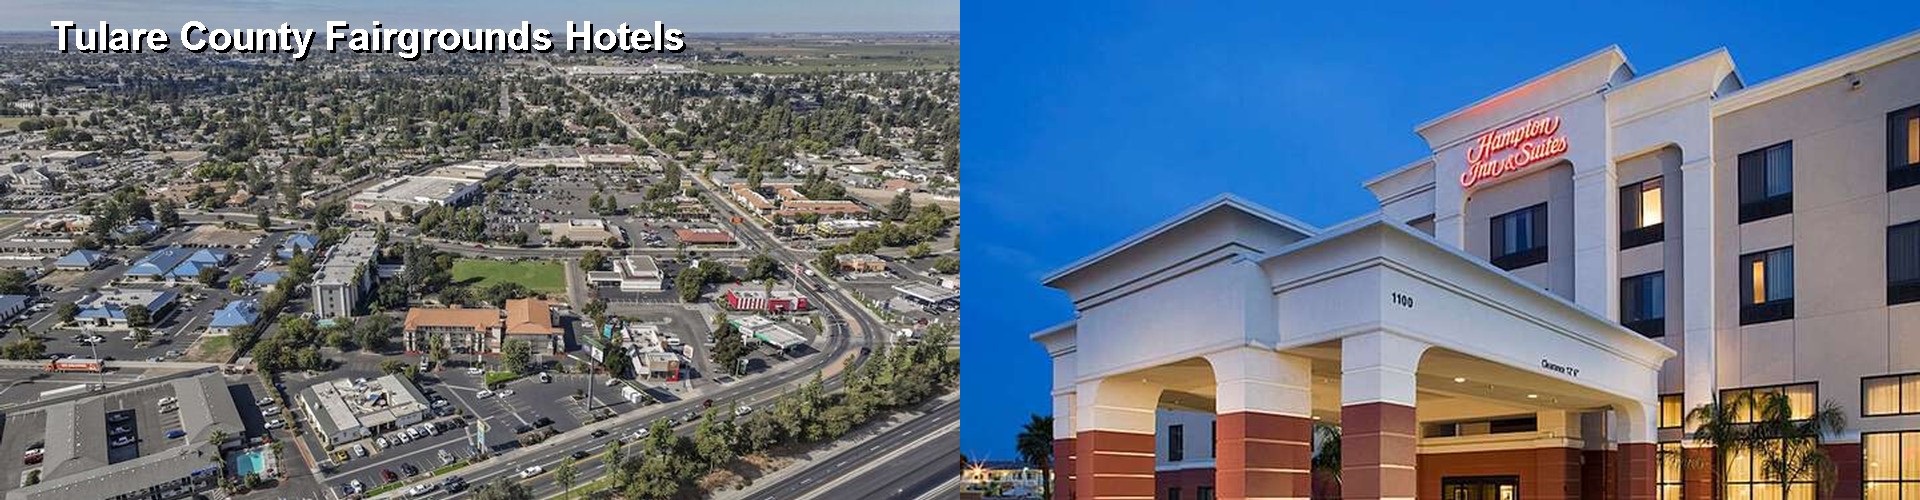 5 Best Hotels near Tulare County Fairgrounds